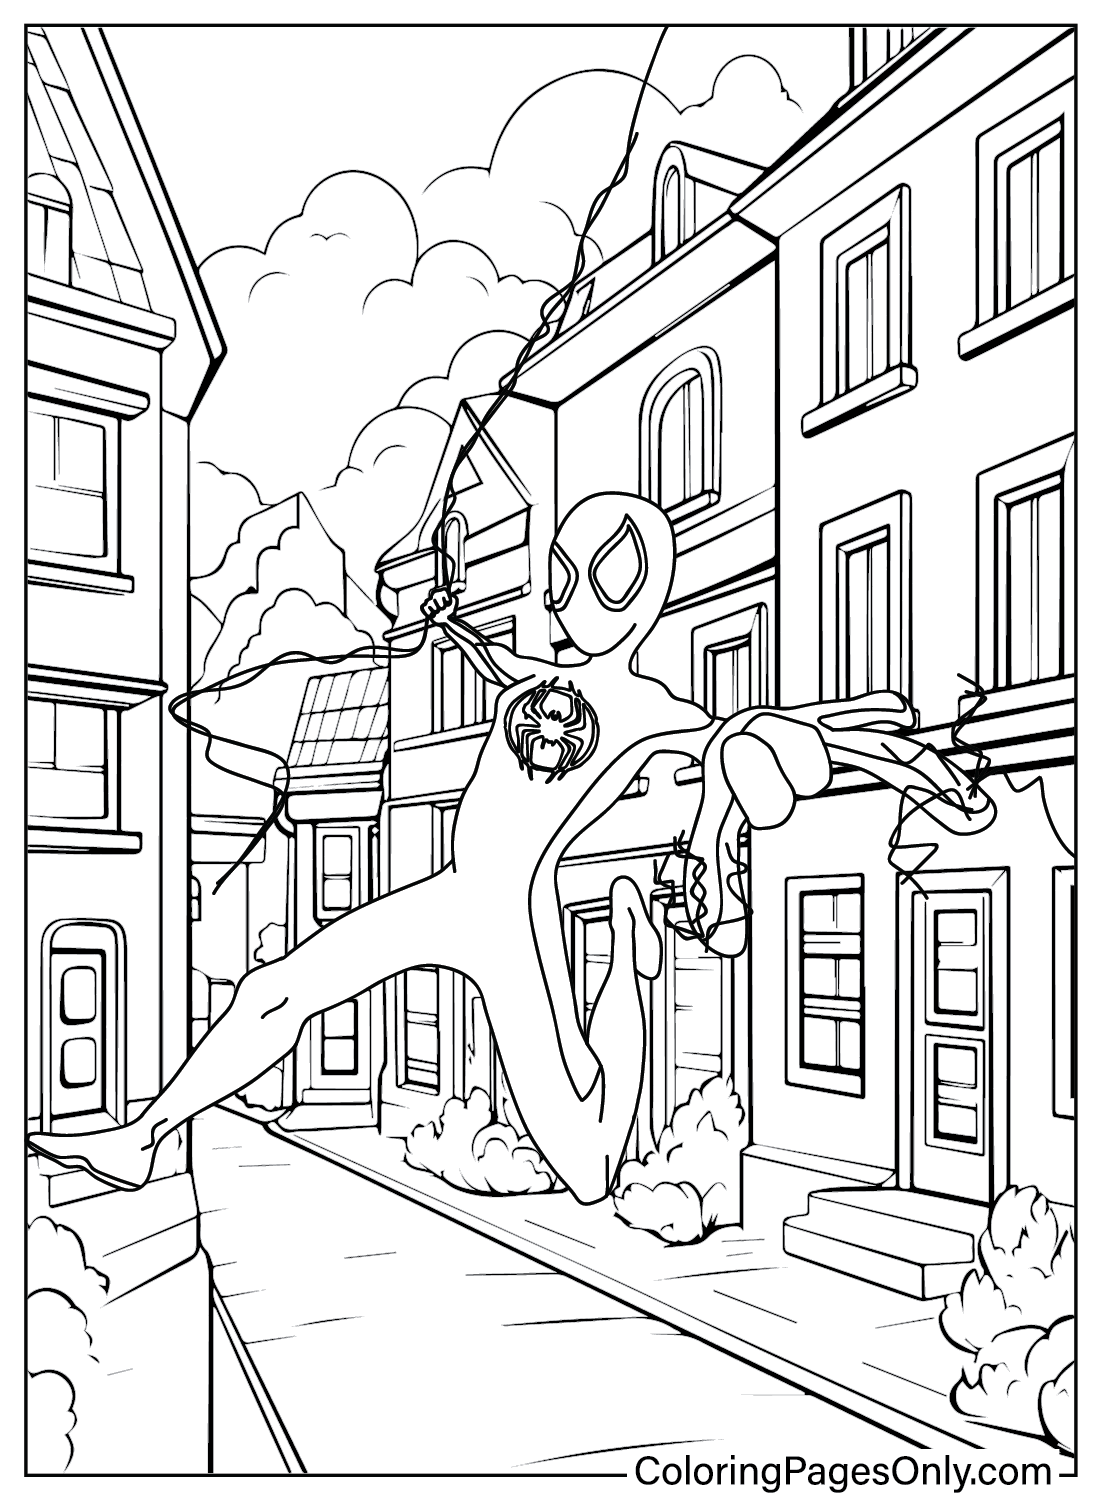 Free Printable Spider-Man Across the Spider Coloring Page